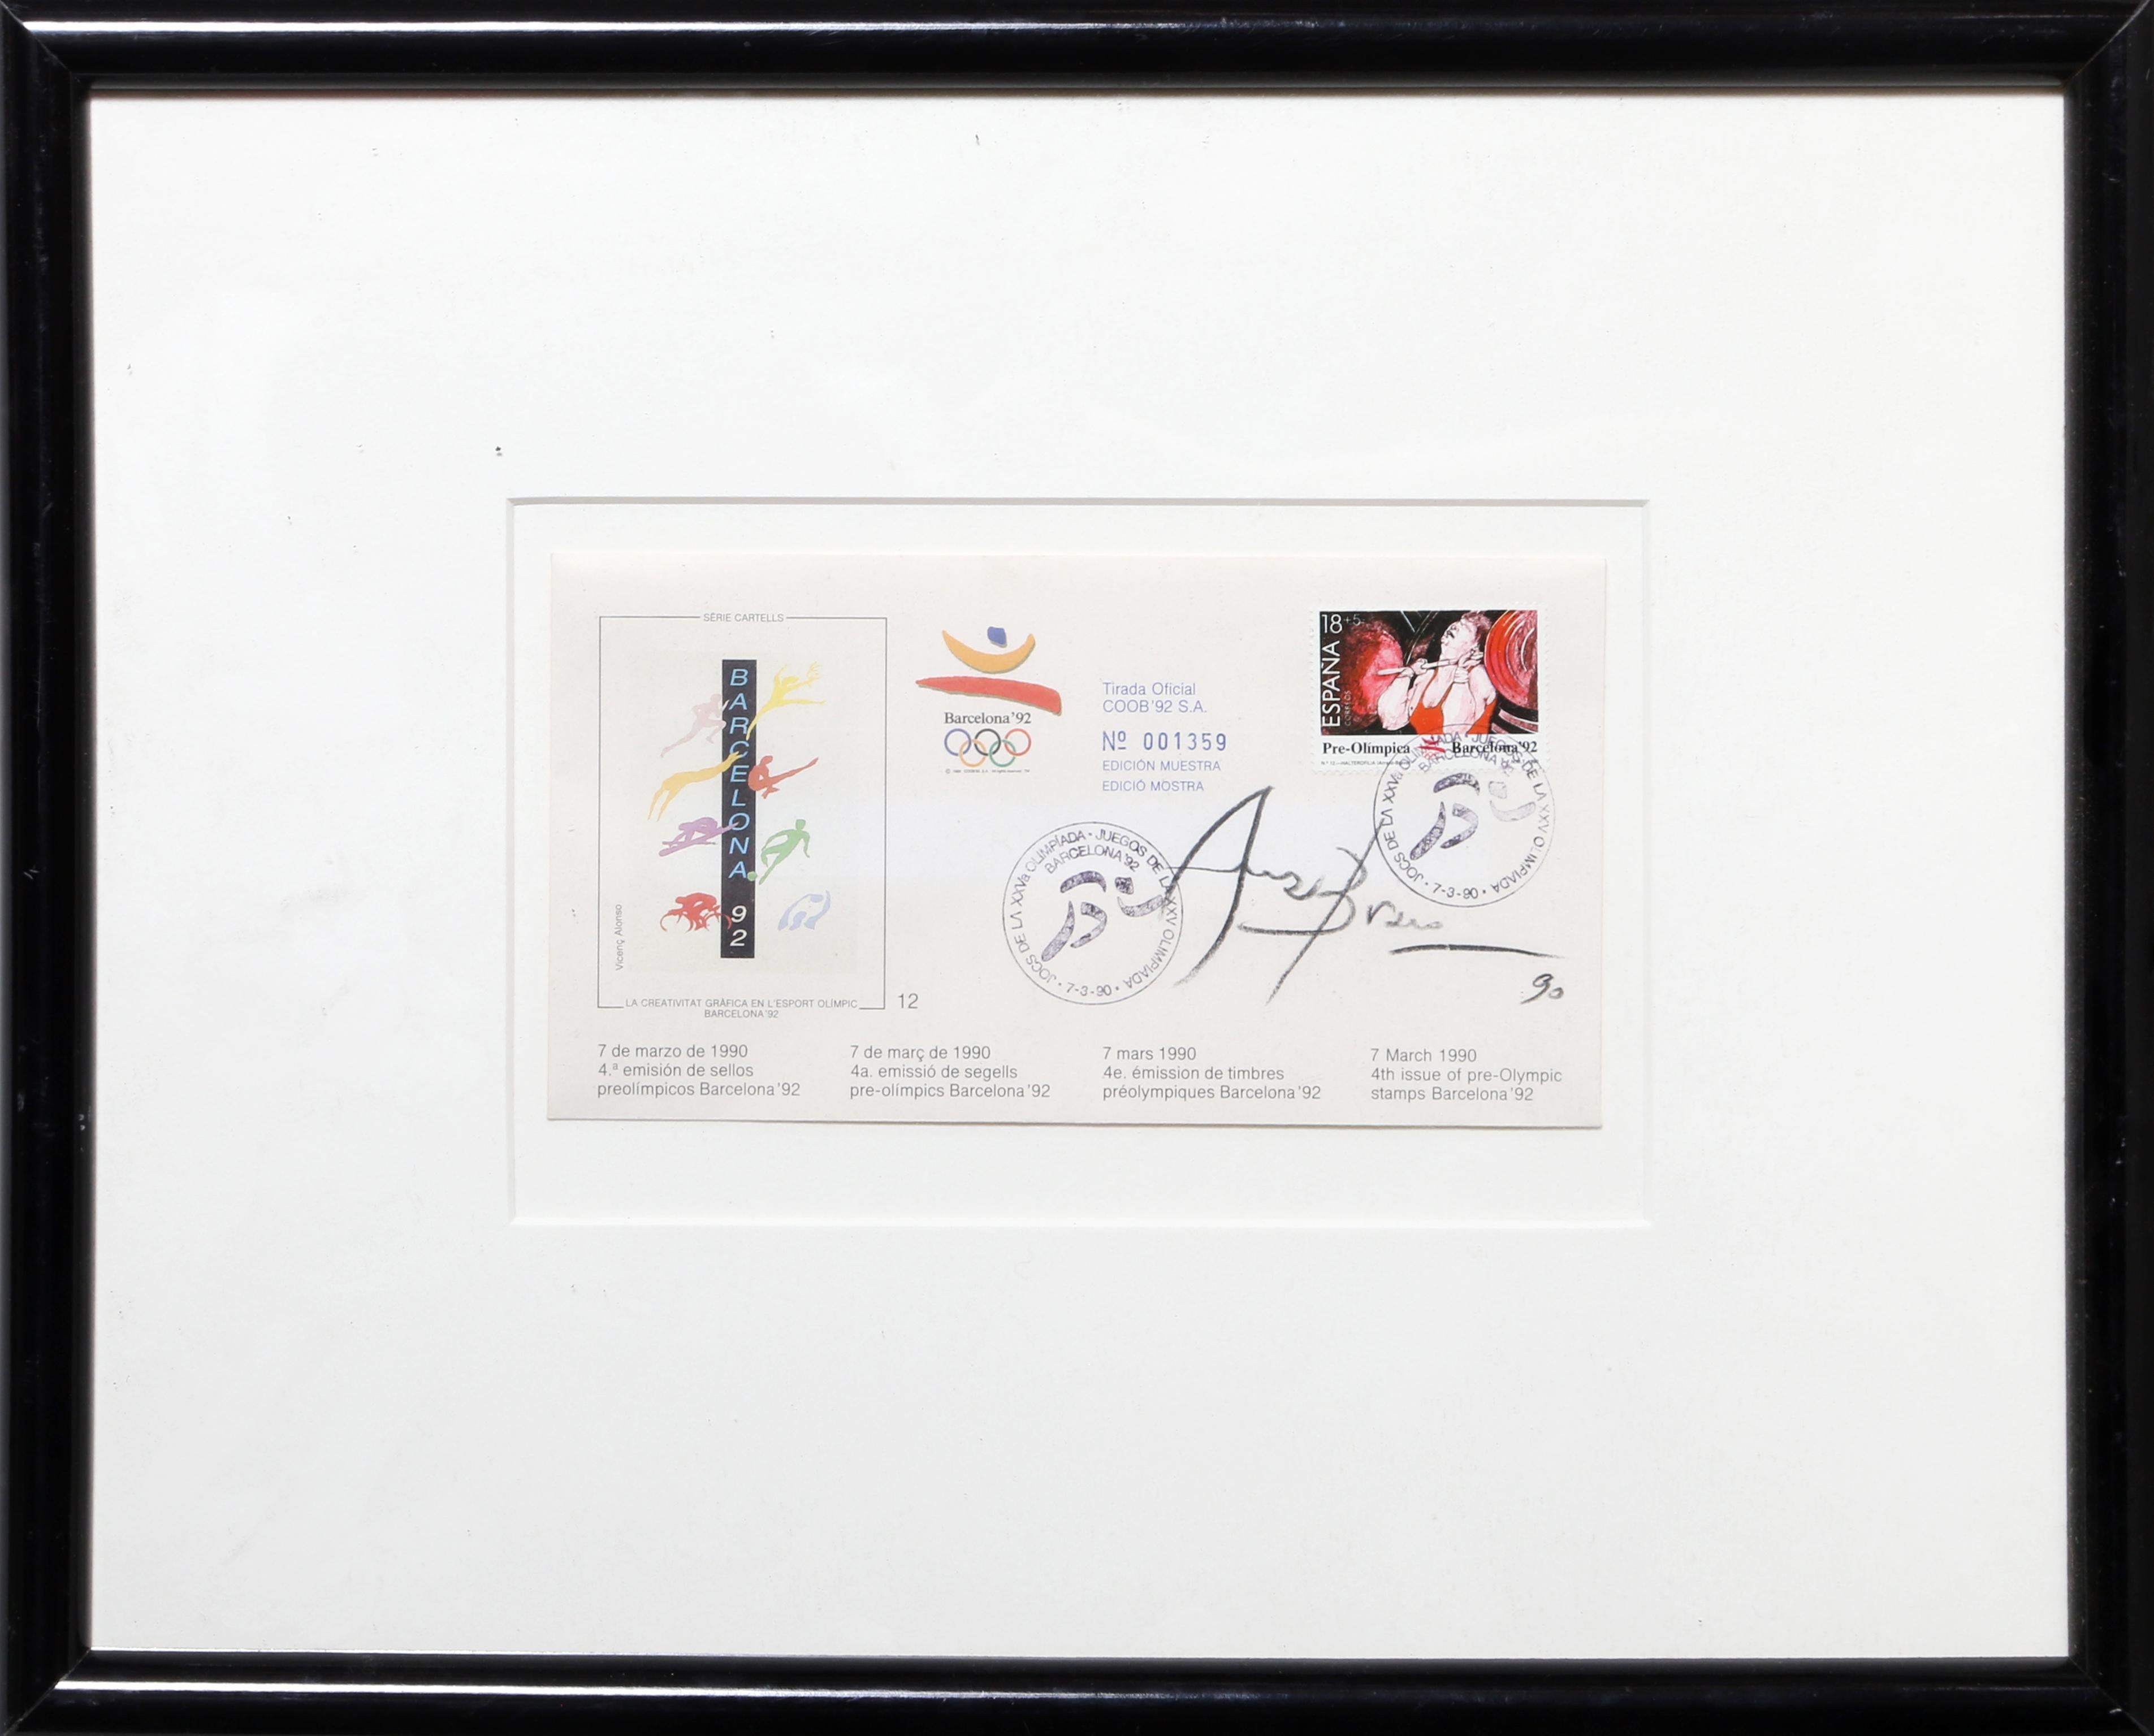 Pre-Olympic stamps created for the ‘92 Barcelona Olympics by Spanish artist Eduardo Arranz Bravo.

Barcelona Pre-Olympic Stamp 2
Eduardo Arranz-Bravo, Spanish (1941)
Date: 1990
Mixed Media on Paper, signed
Edition of 4th Issue
Size: 3.75 x 7.25 in.